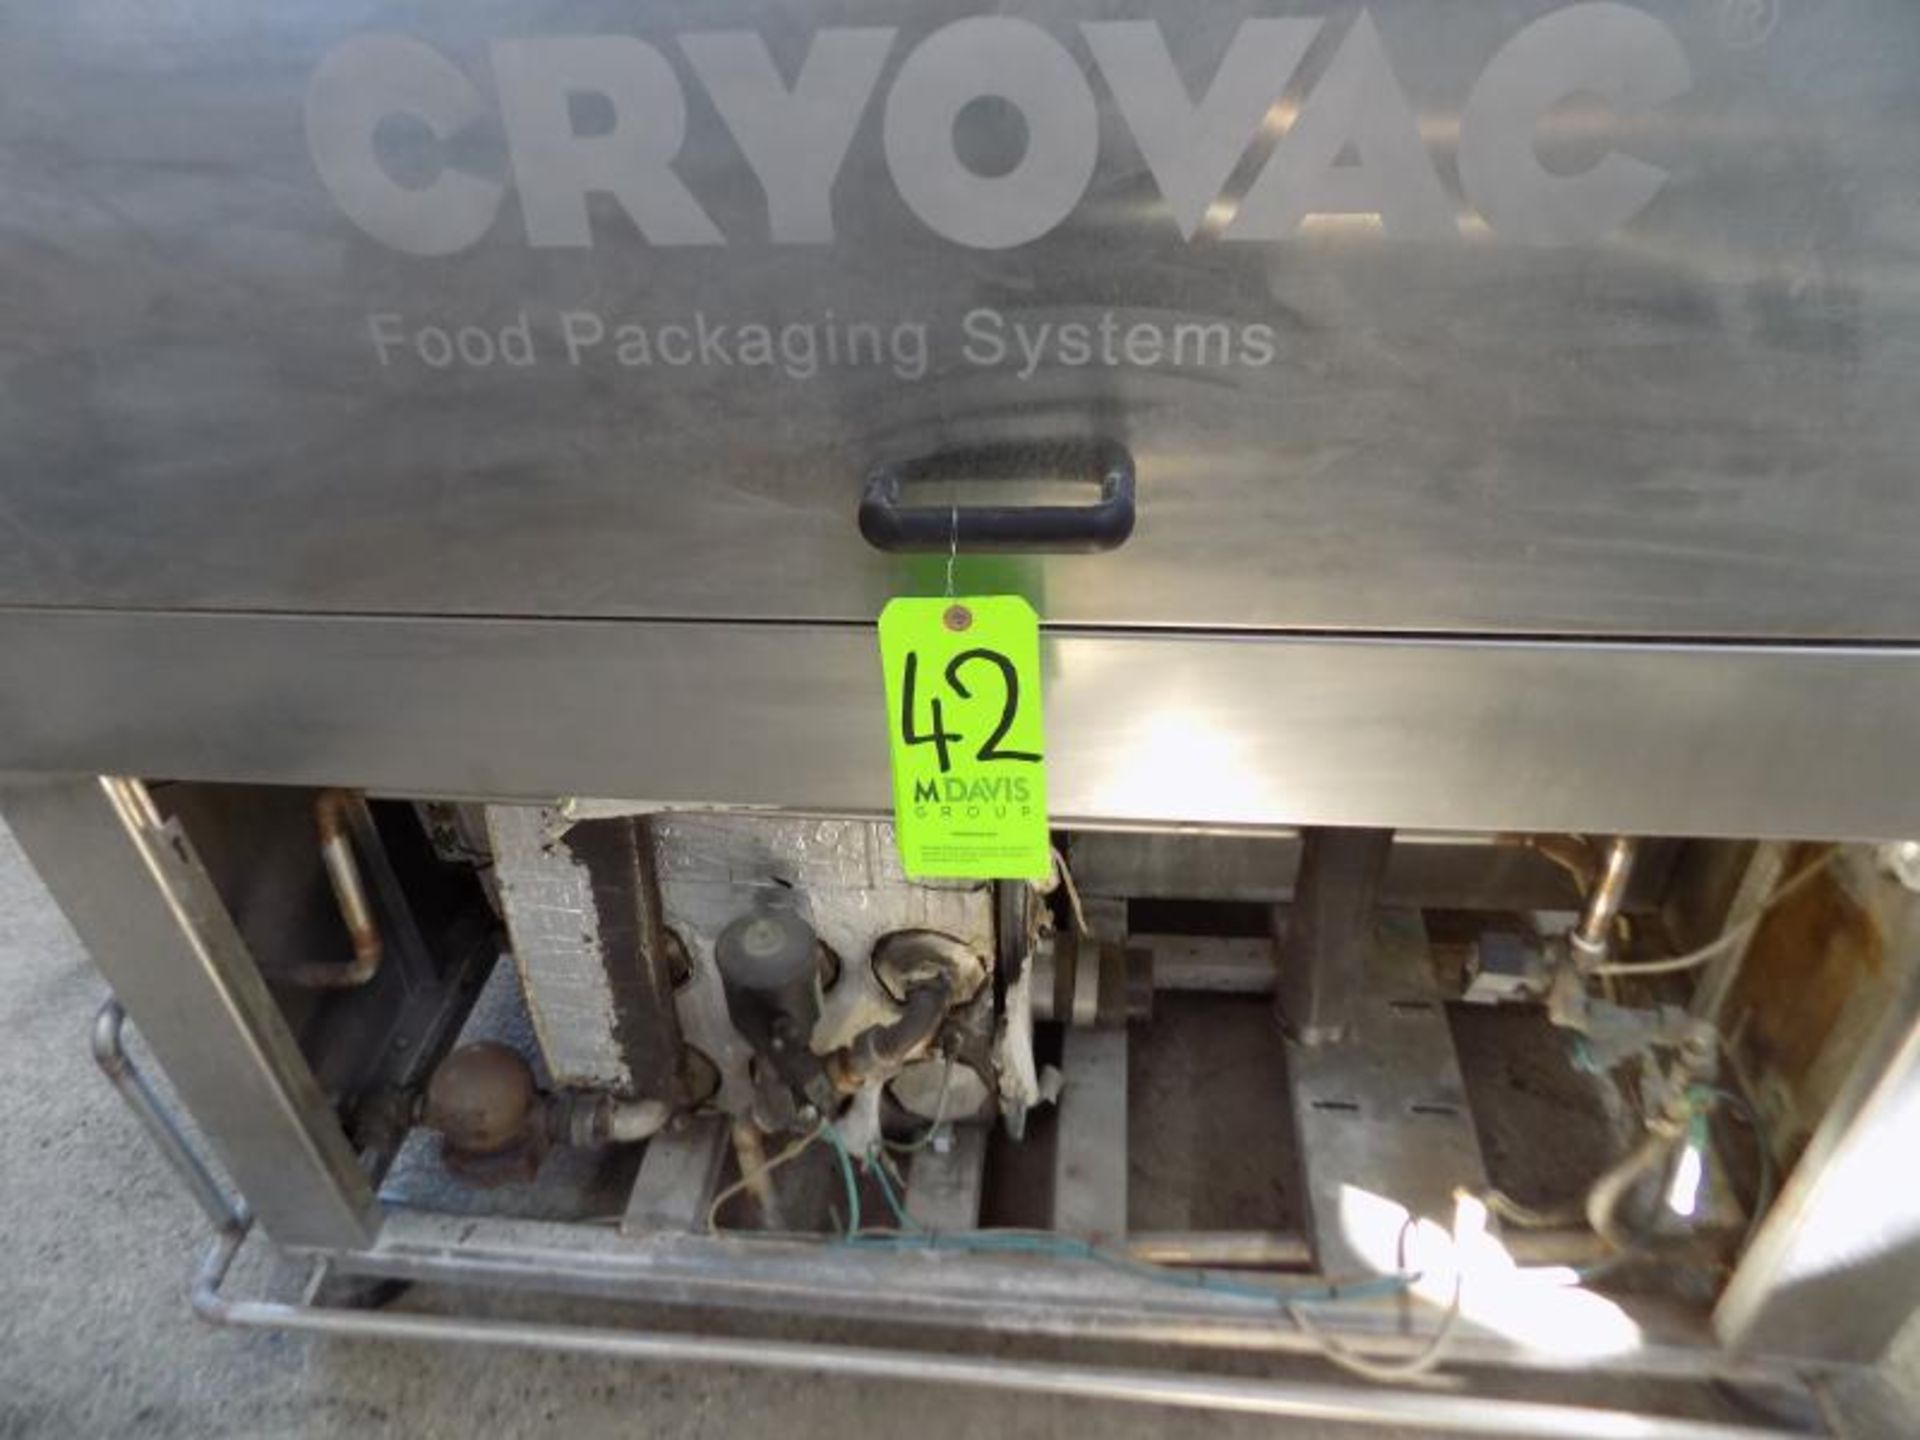 2007 Sealed Air S/S Cryovac Food Packaging Systems, Model ST98-600 STEAM, S/N A54301323 - Image 2 of 6